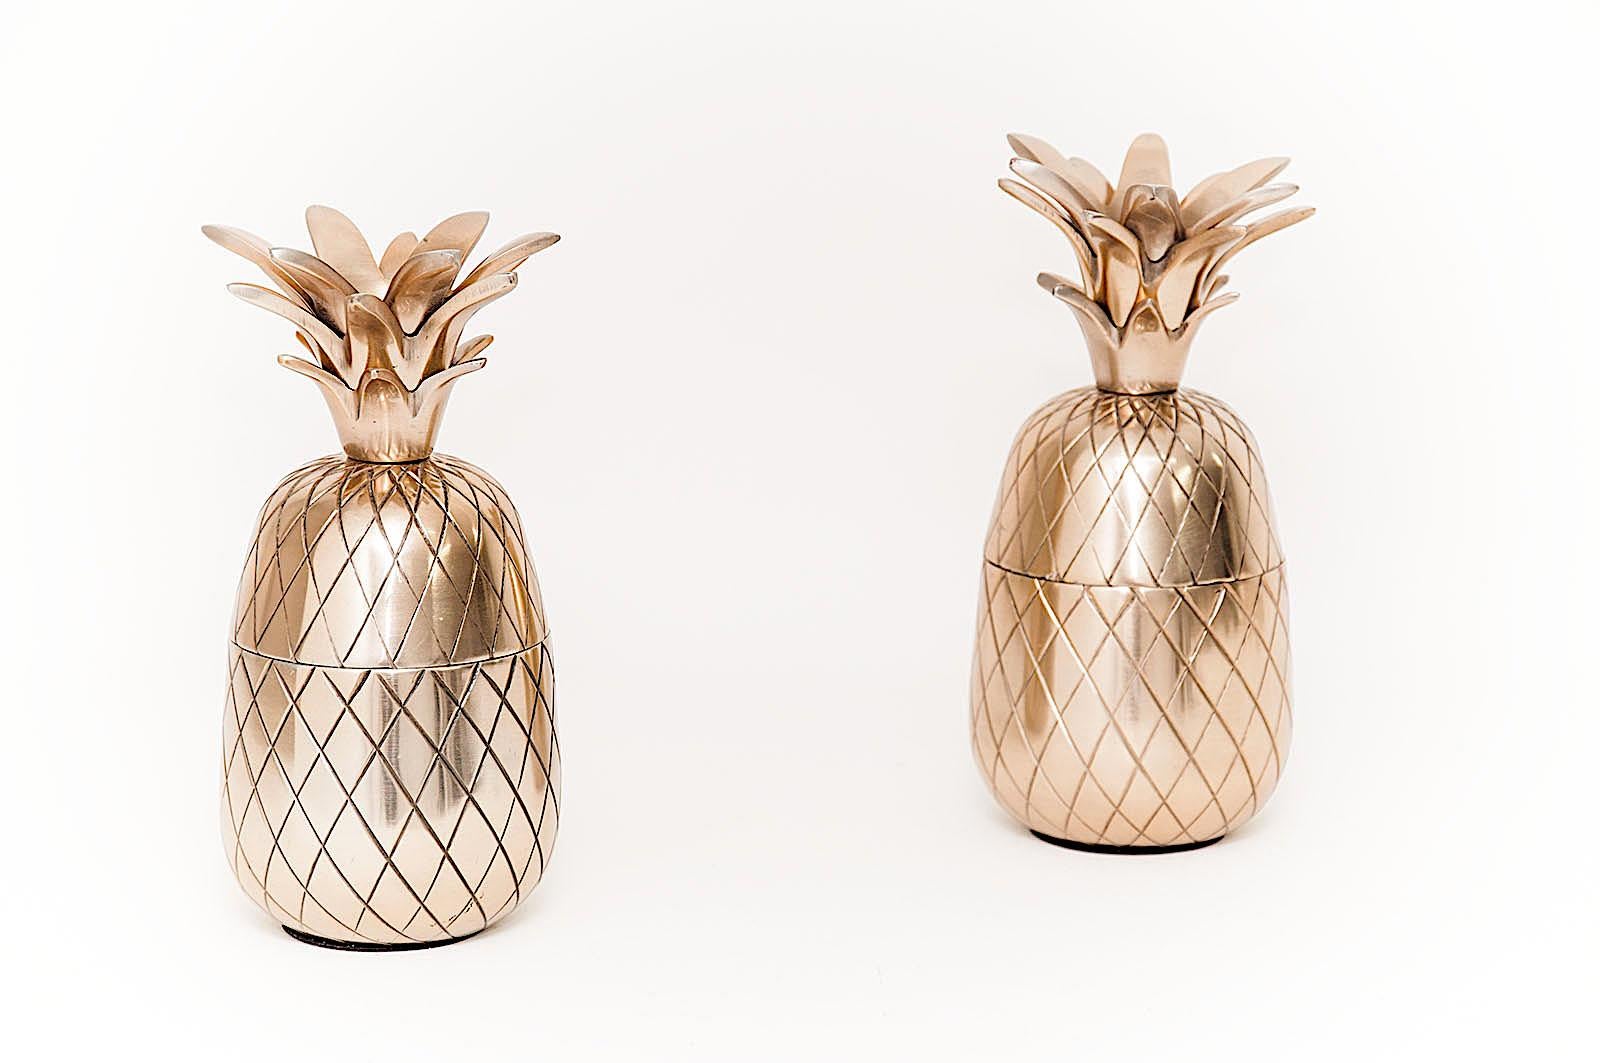 Hollywood Regency Ice Bucket Pineapple, in Brass, Silver Colored, from the 1970s, a Set of Two